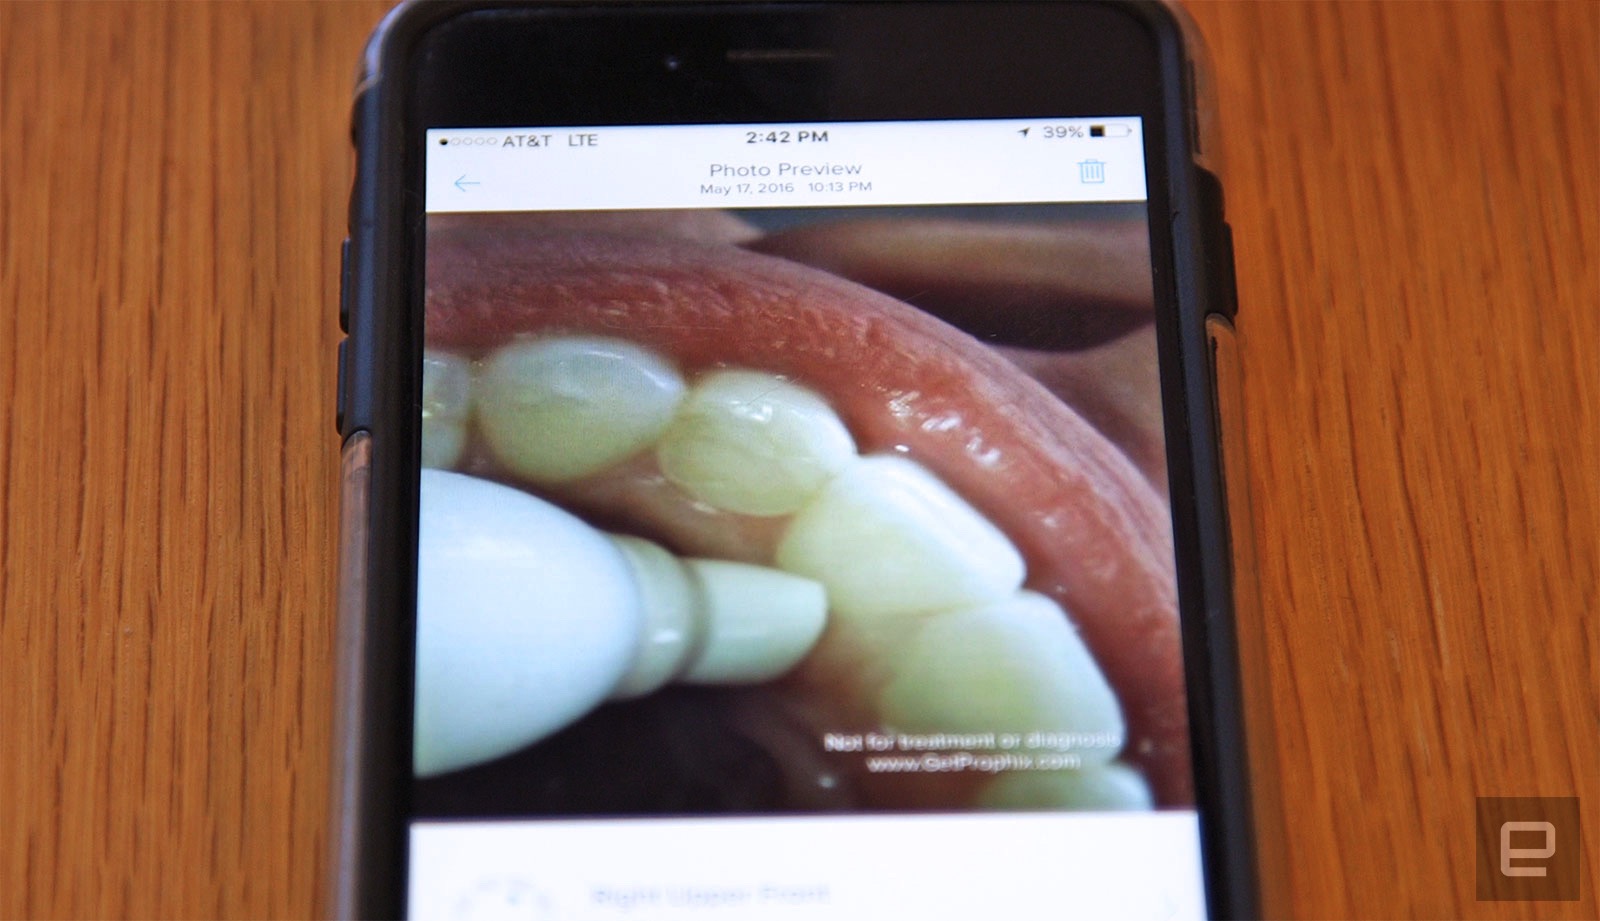 The Prophix smart toothbrush will film the inside of your mouth